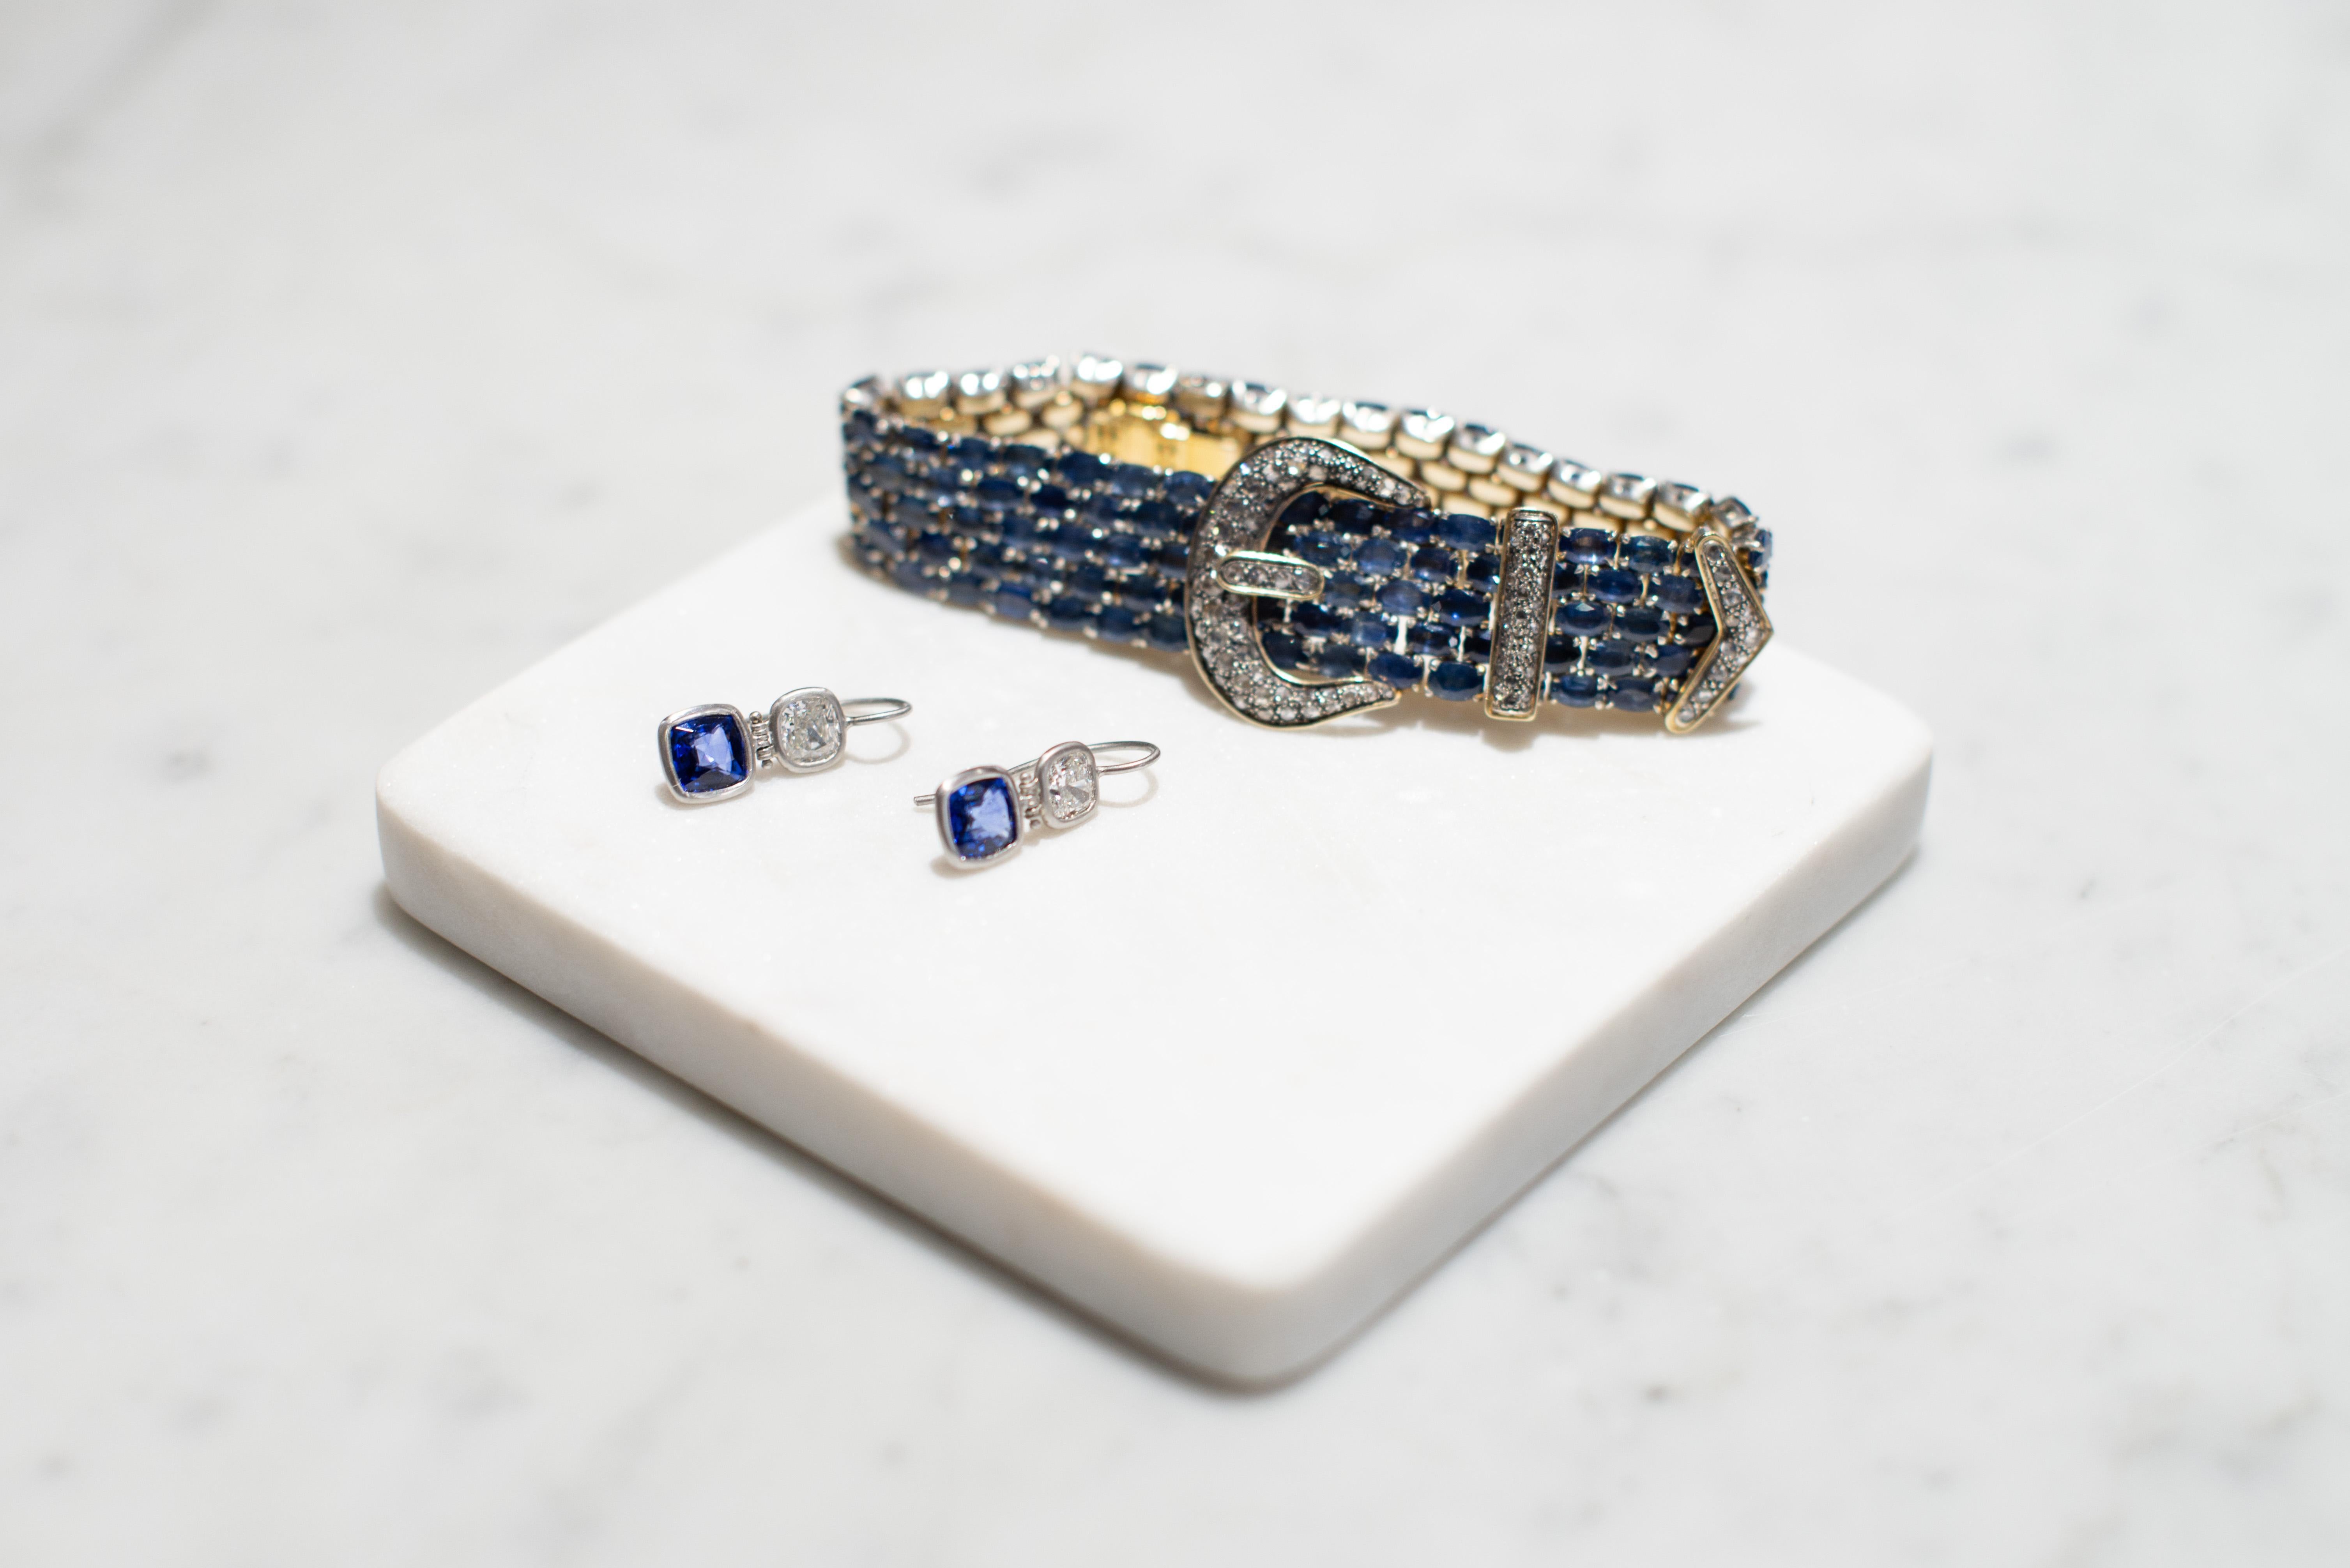 This vintage 14k and Sterling Silver Diamond Sapphire Mesh Bracelet is graceful and striking. A true example of superior craftsmanship and design.  It stands alone in its uniqueness and is a marvel to admire.   It is crafted in 14kt and Sterling